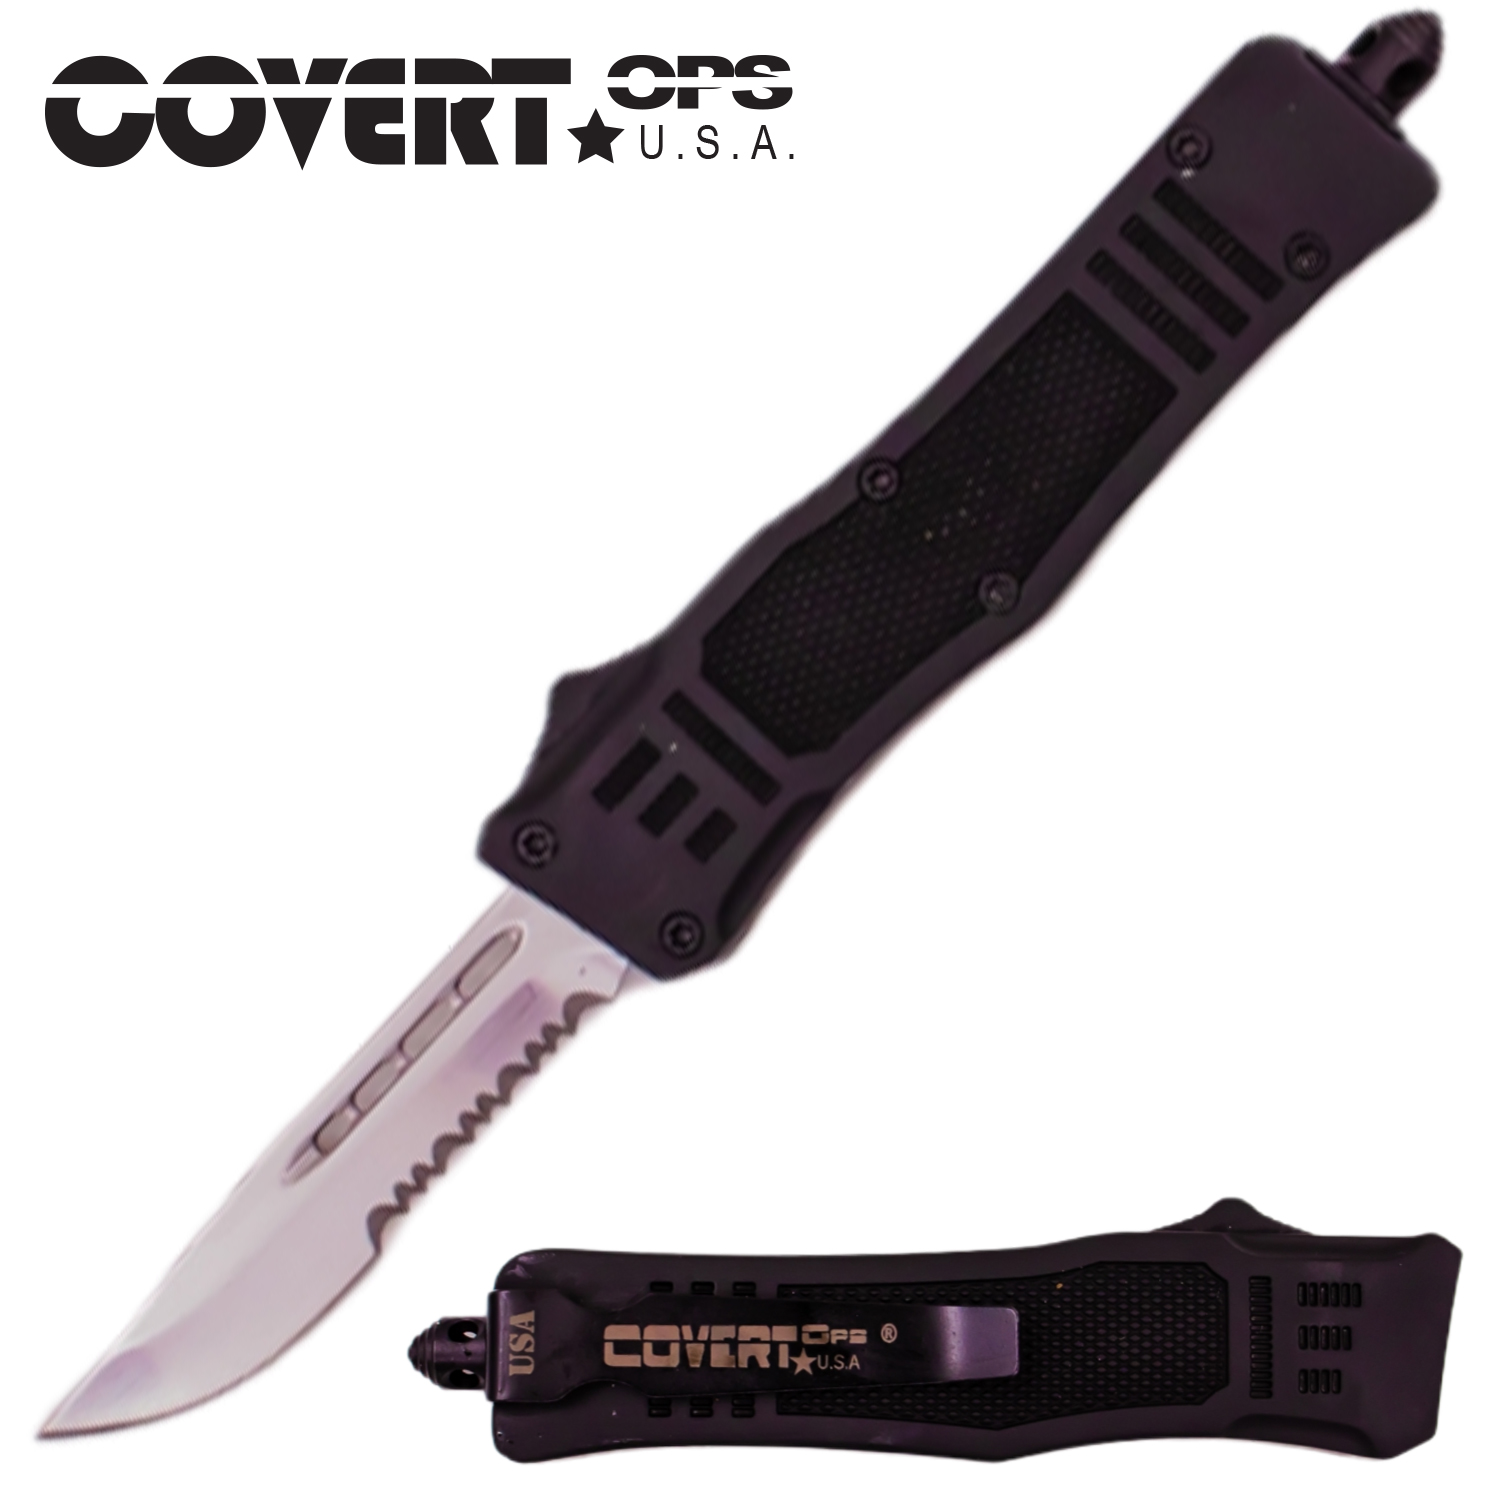 Covert OPS USA OTF Automatic Knife 7 inch Black Handle Chrome HalfSer